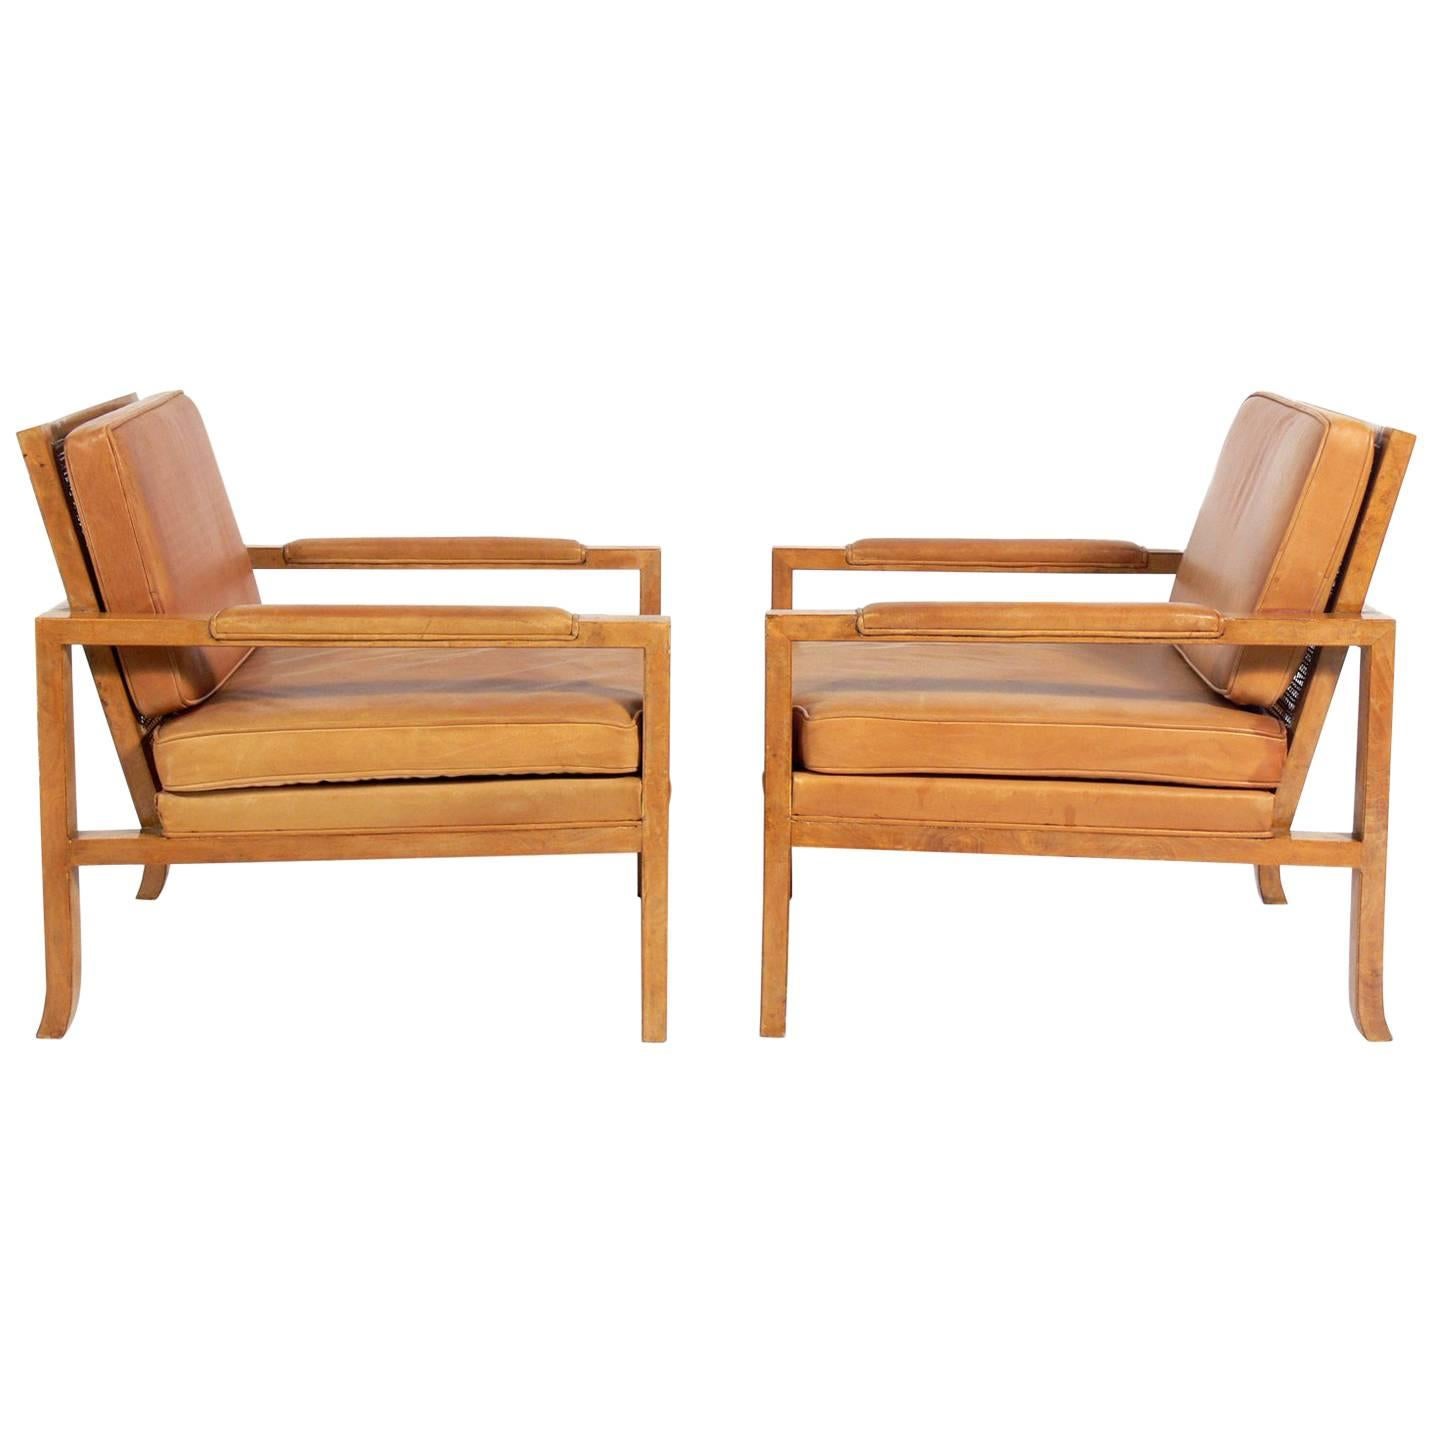 Pair of Caned Back Burl Wood Lounge Chairs in Original Saddle Leather